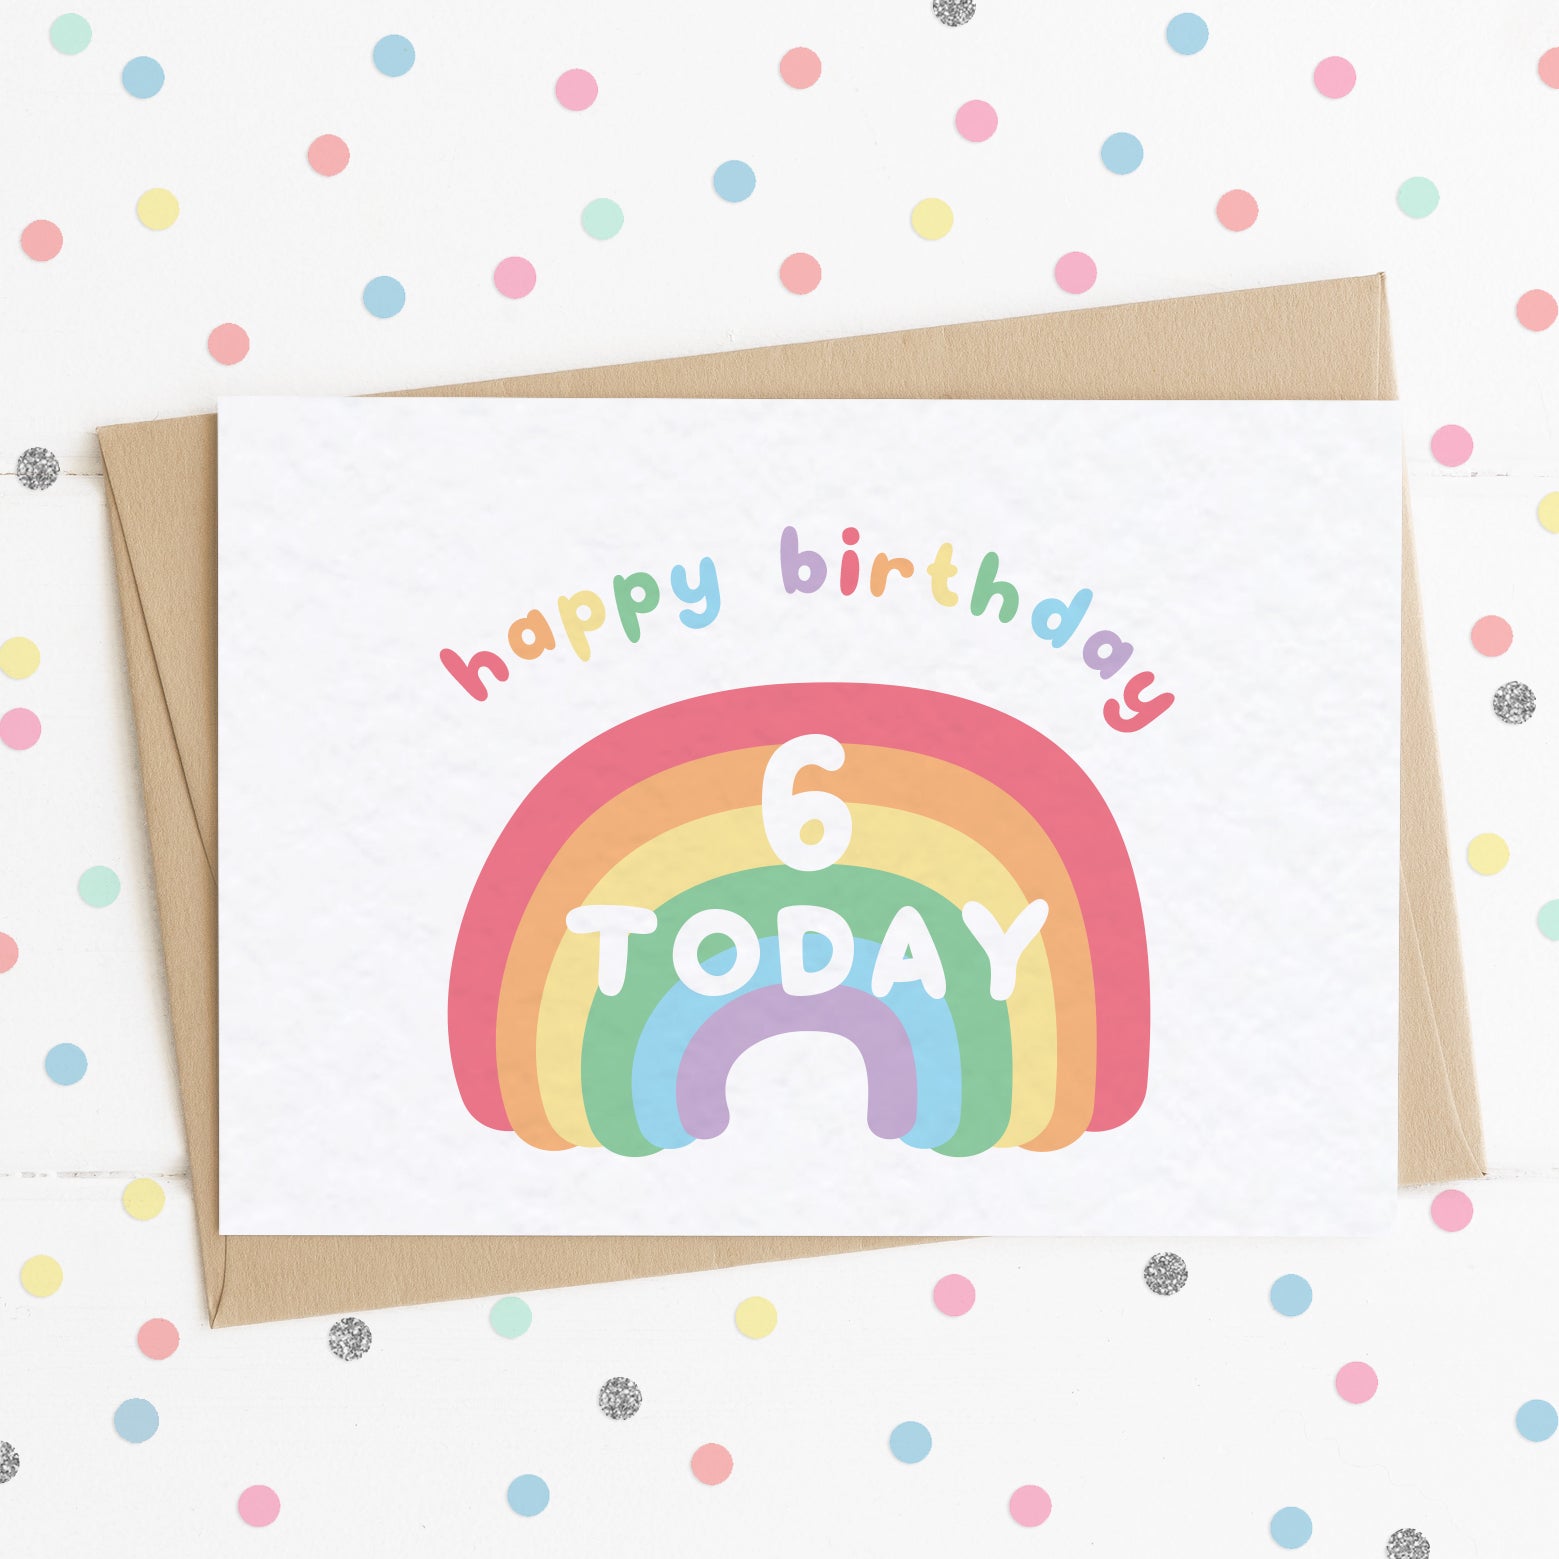 A cute milestone age birthday card with a smiling happy rainbow on it and the message "HAPPY BIRTHDAY - 6 TODAY".